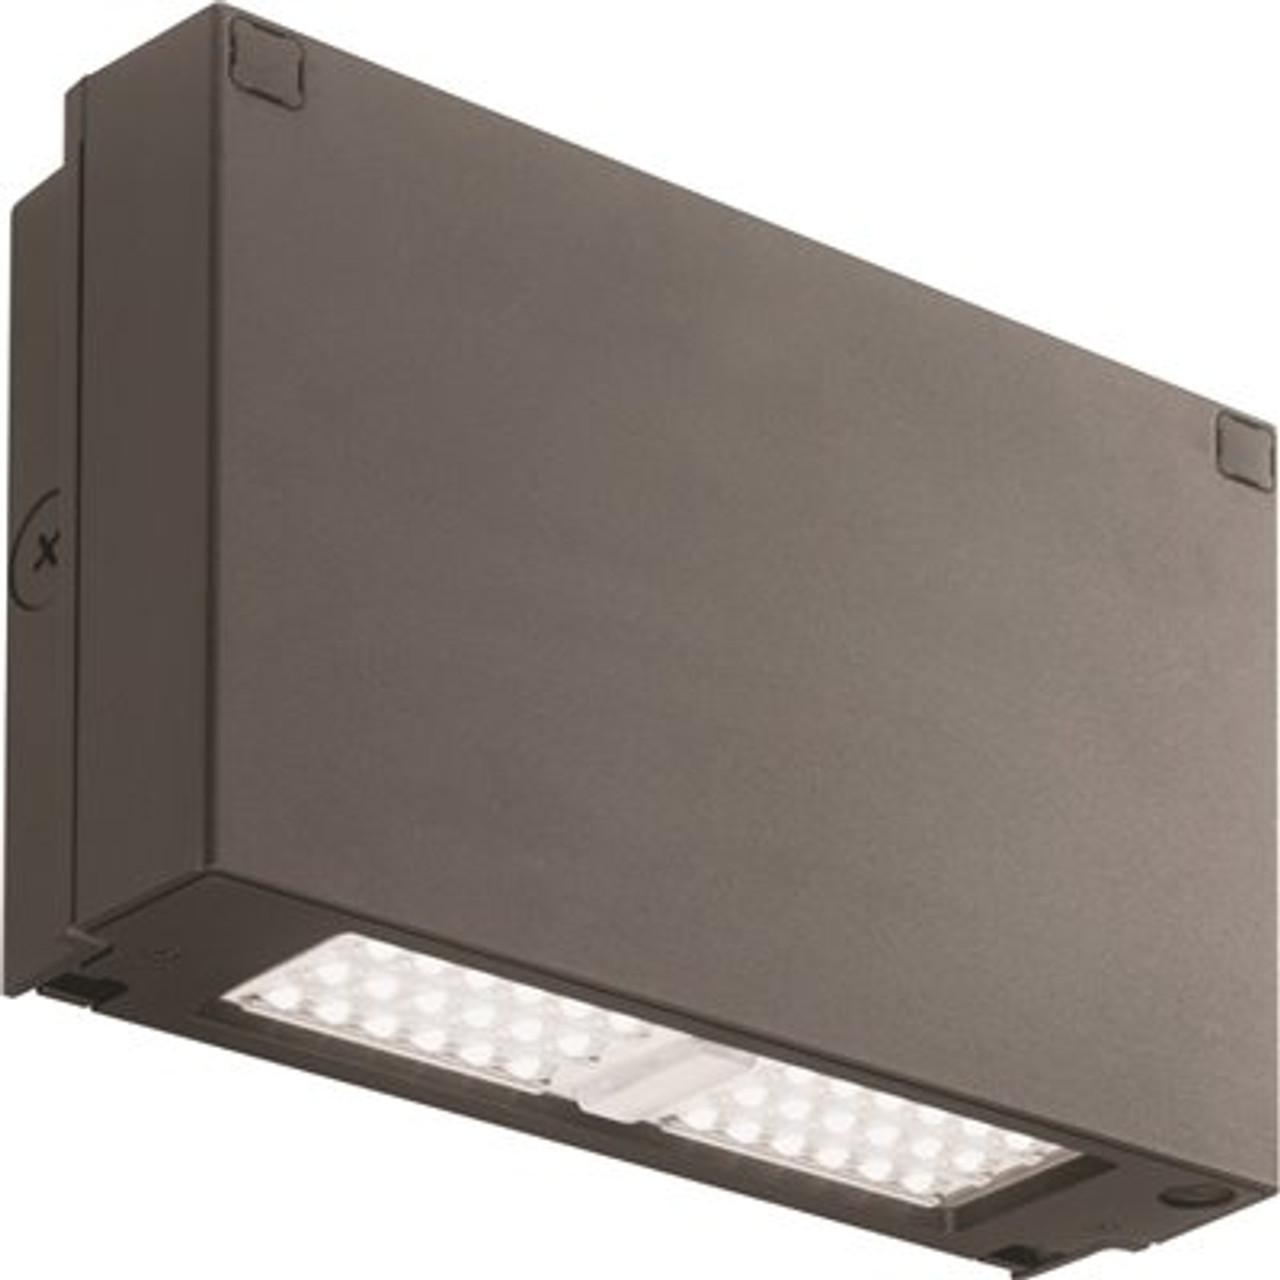 Lithonia Lighting Contractor Select 250- Watt Equivalent Integrated LED Bronze Wall Pack Light, 4000K